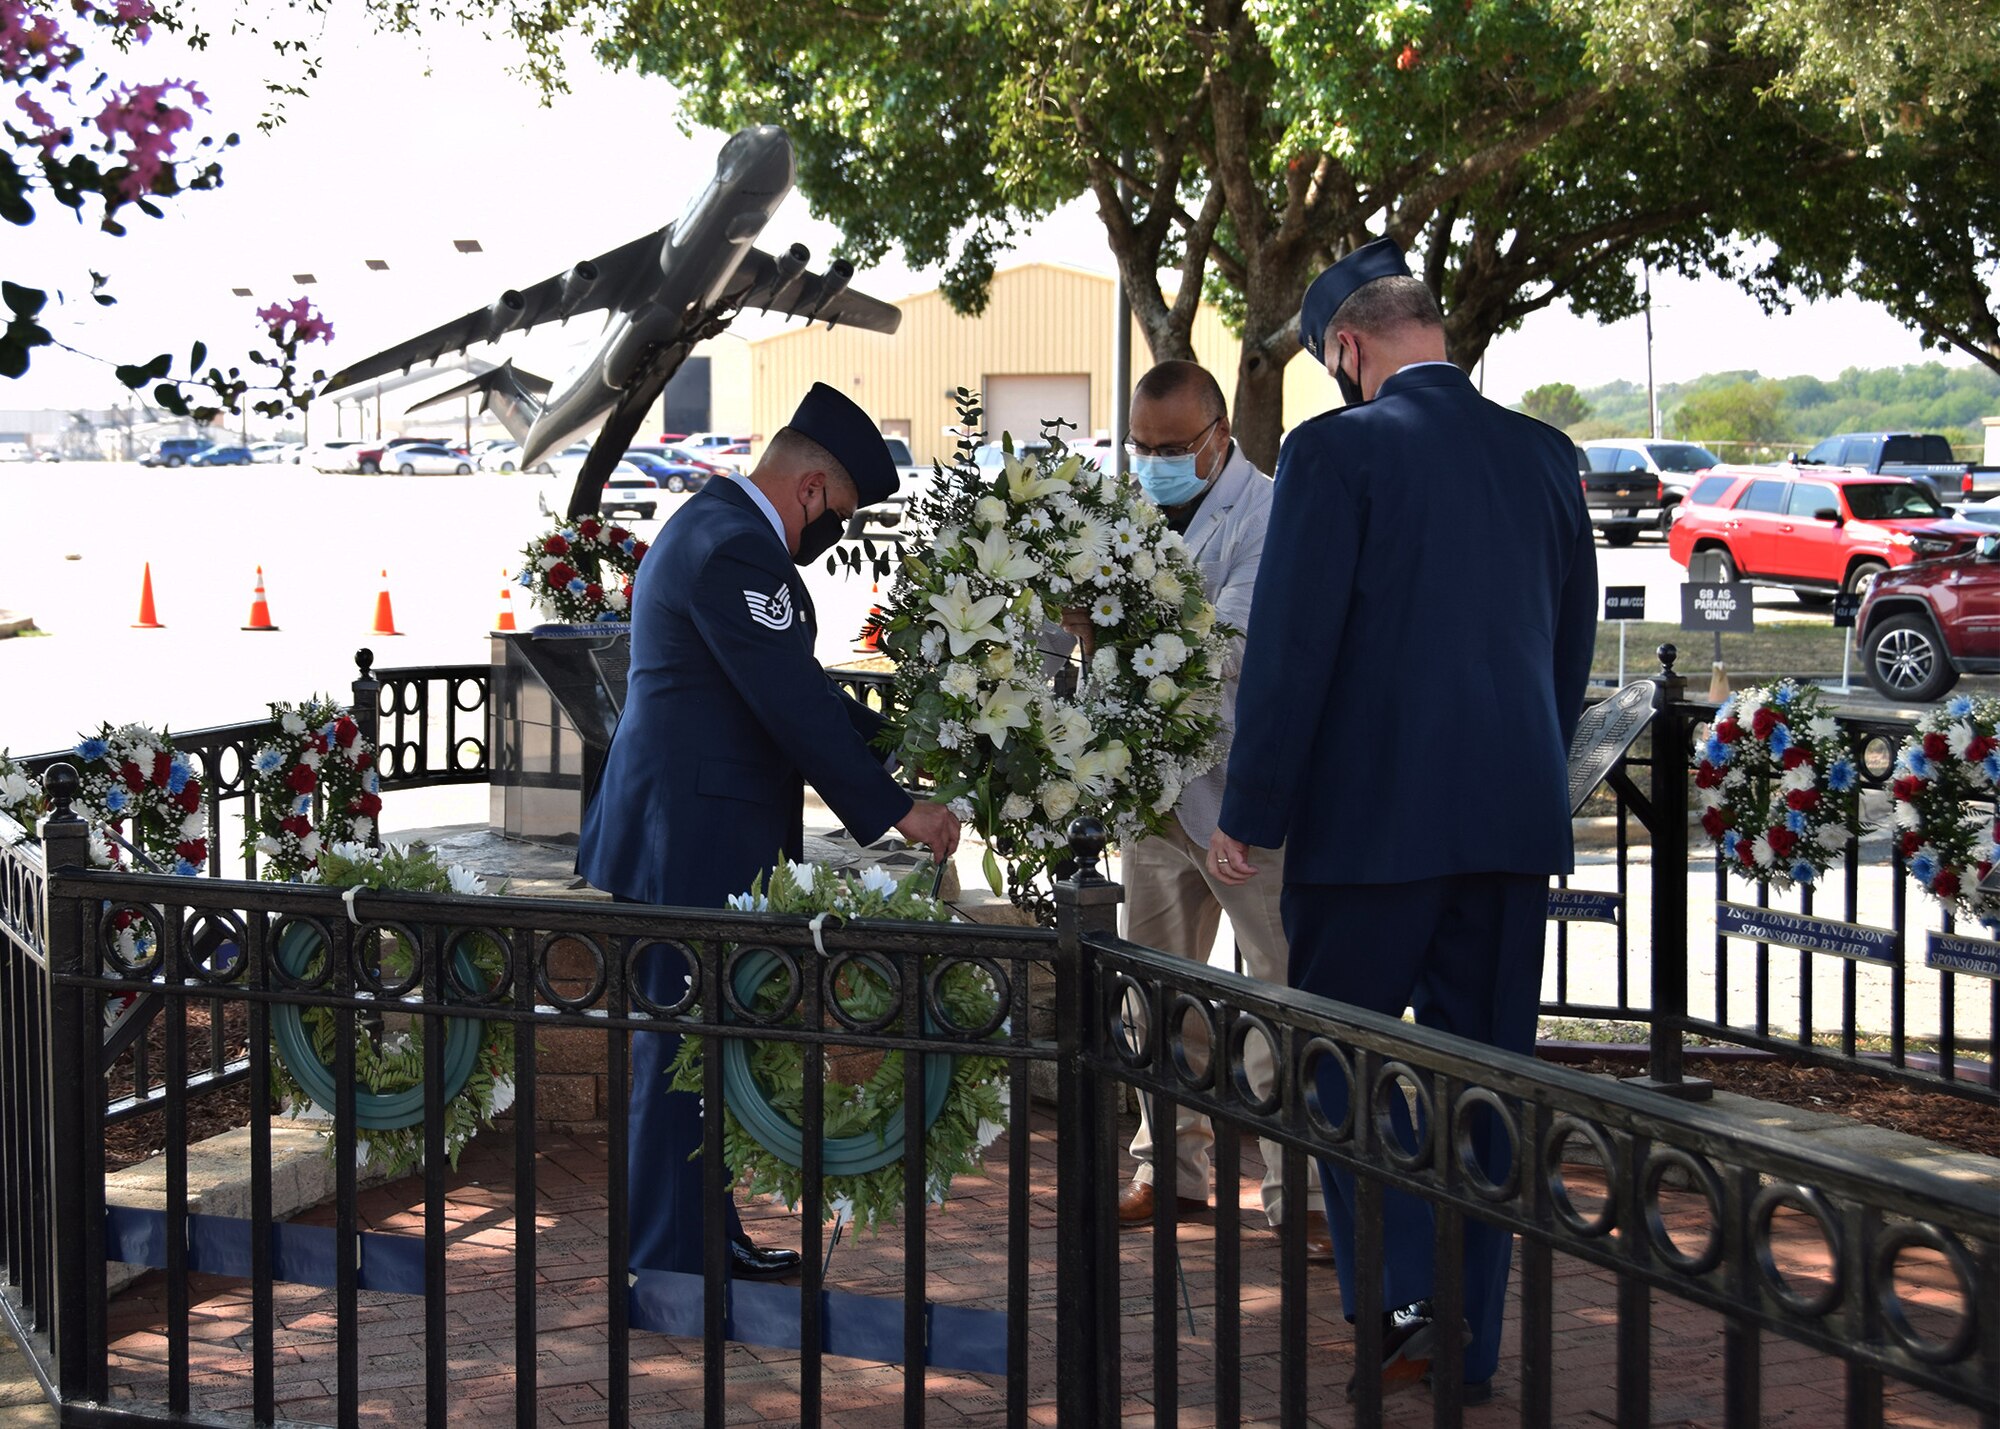 Tech. Sgt. Joe Perez, 26th Aerial Port Squadron ramp service supervisor, John P. Perez, and Col. Terry W. McClain, 433rd Airlift Wing commander, lay a wreath at the BRAVO-12 memorial Aug. 28, 2020 at Joint Base San Antonio-Lackland, Texas.